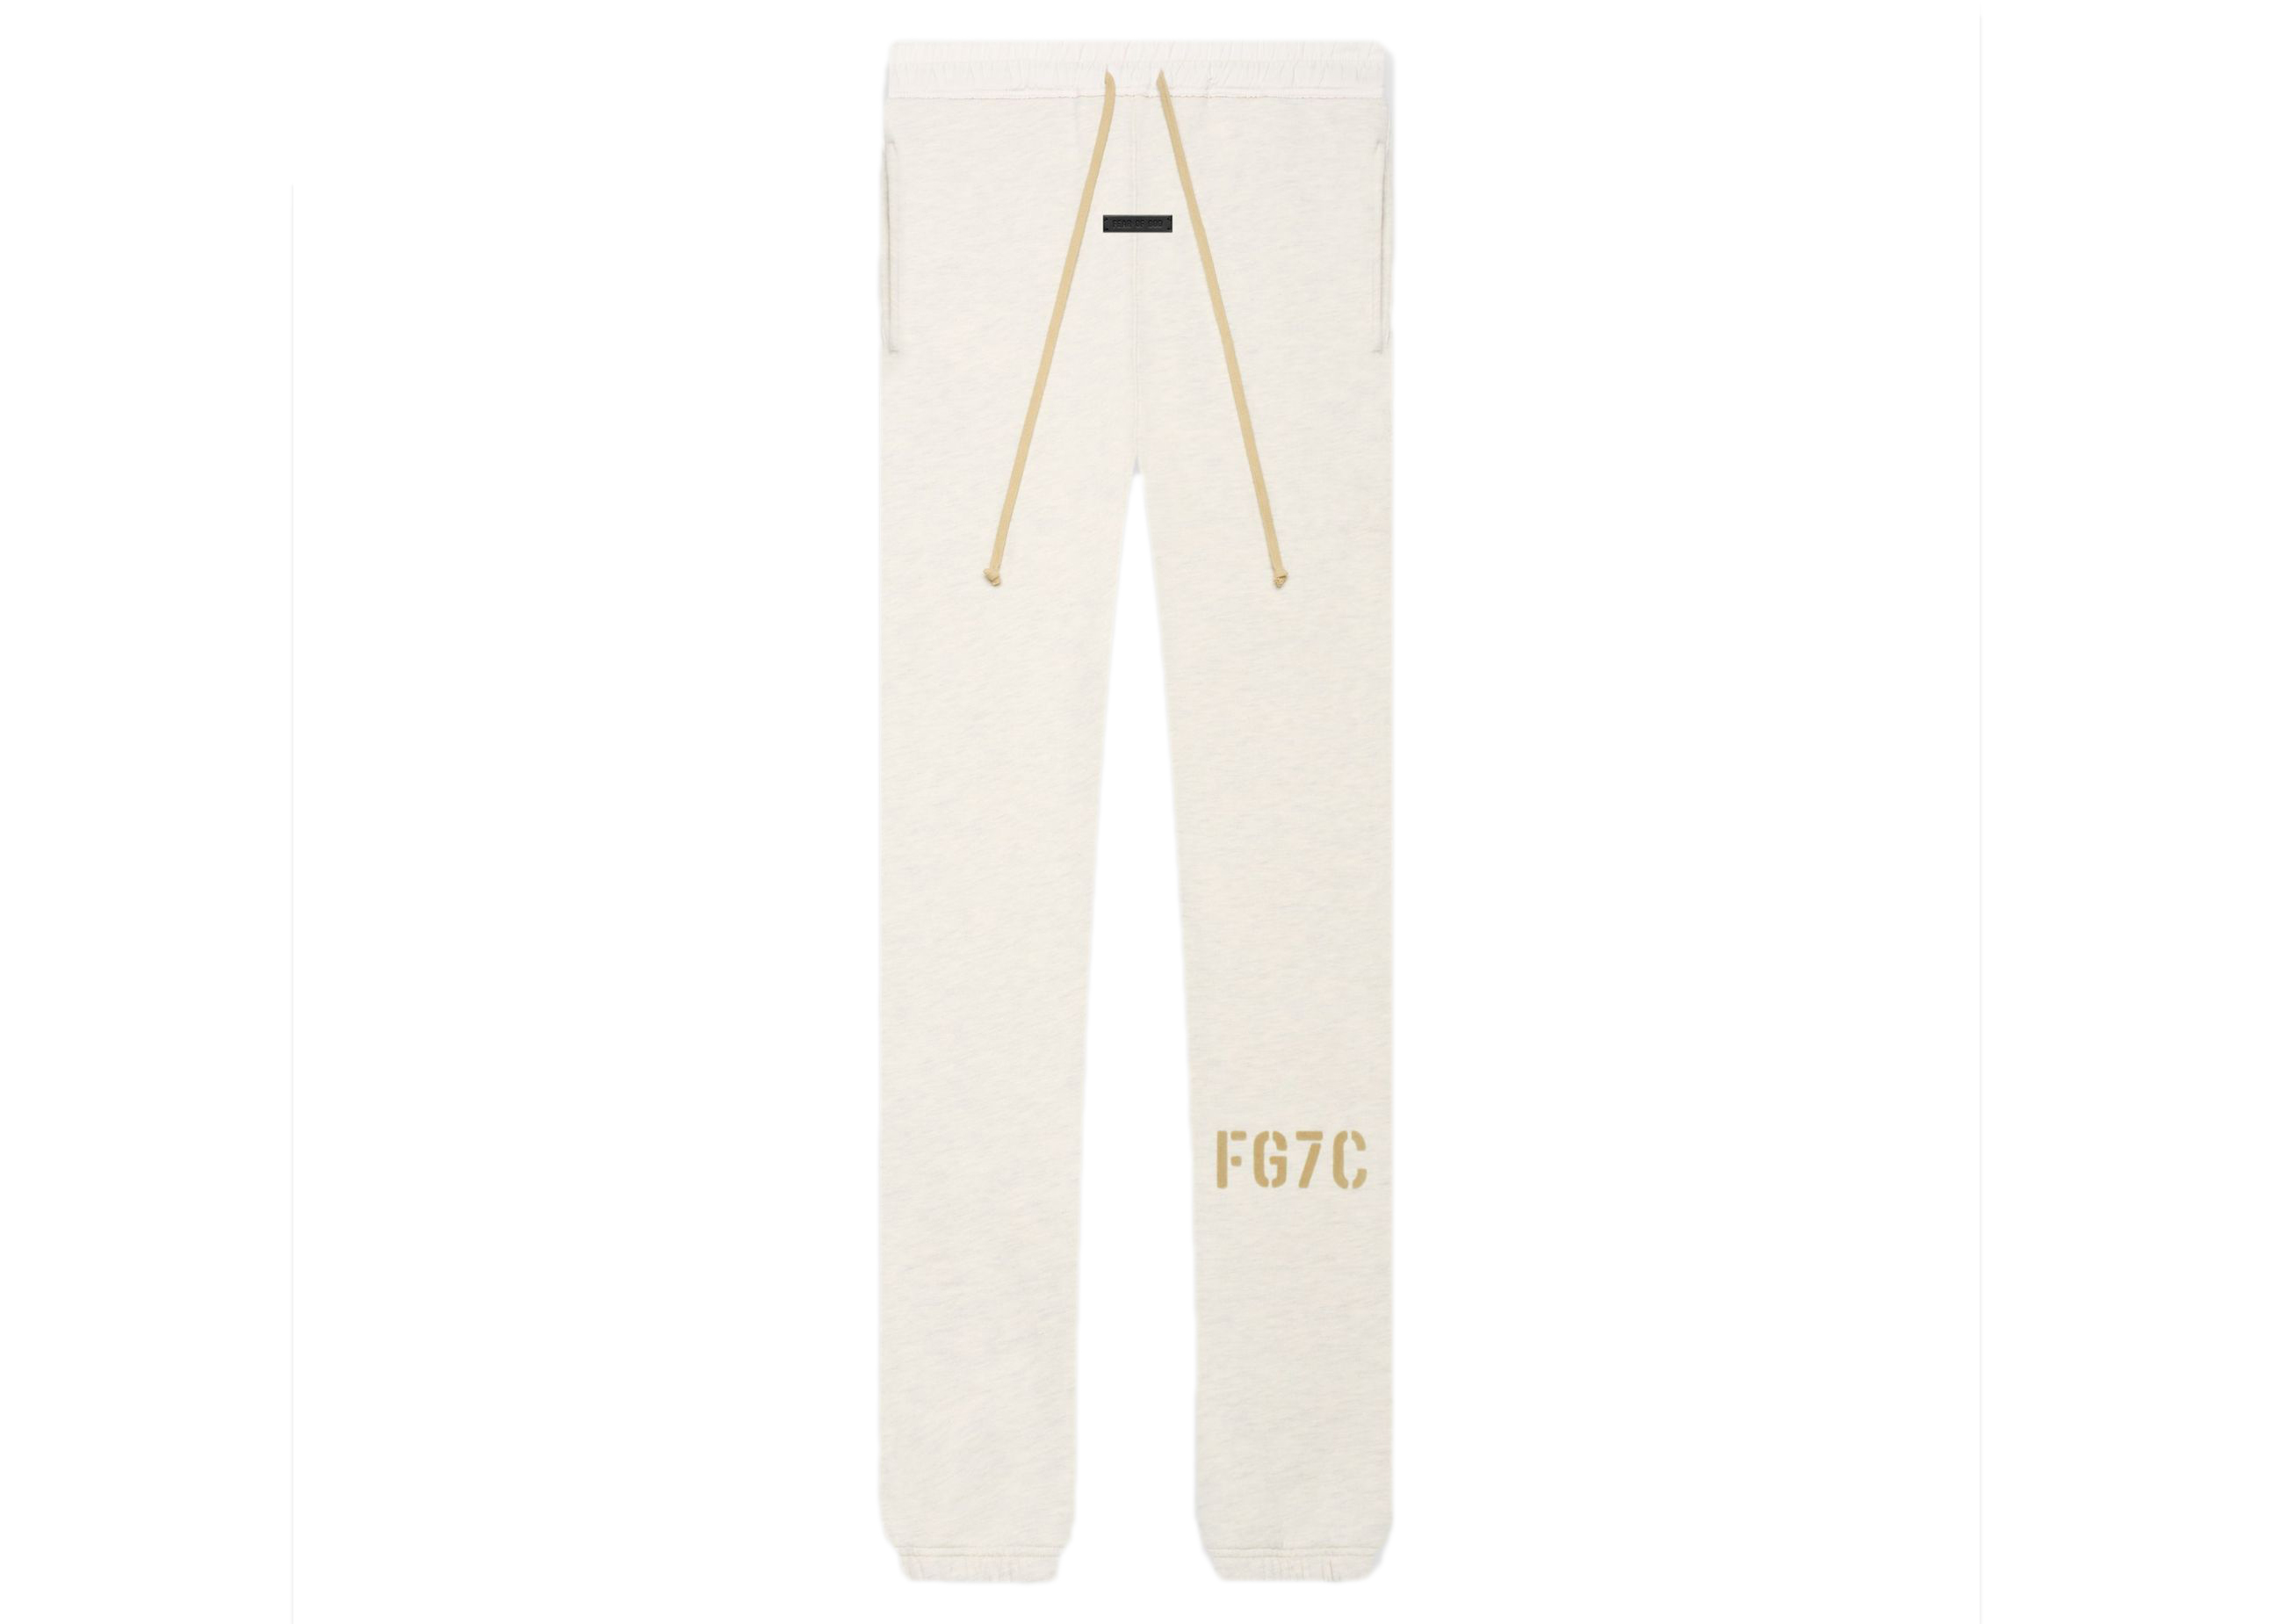 FEAR OF GOD Seventh Collection FG7C Sweatpant Cream Heather 